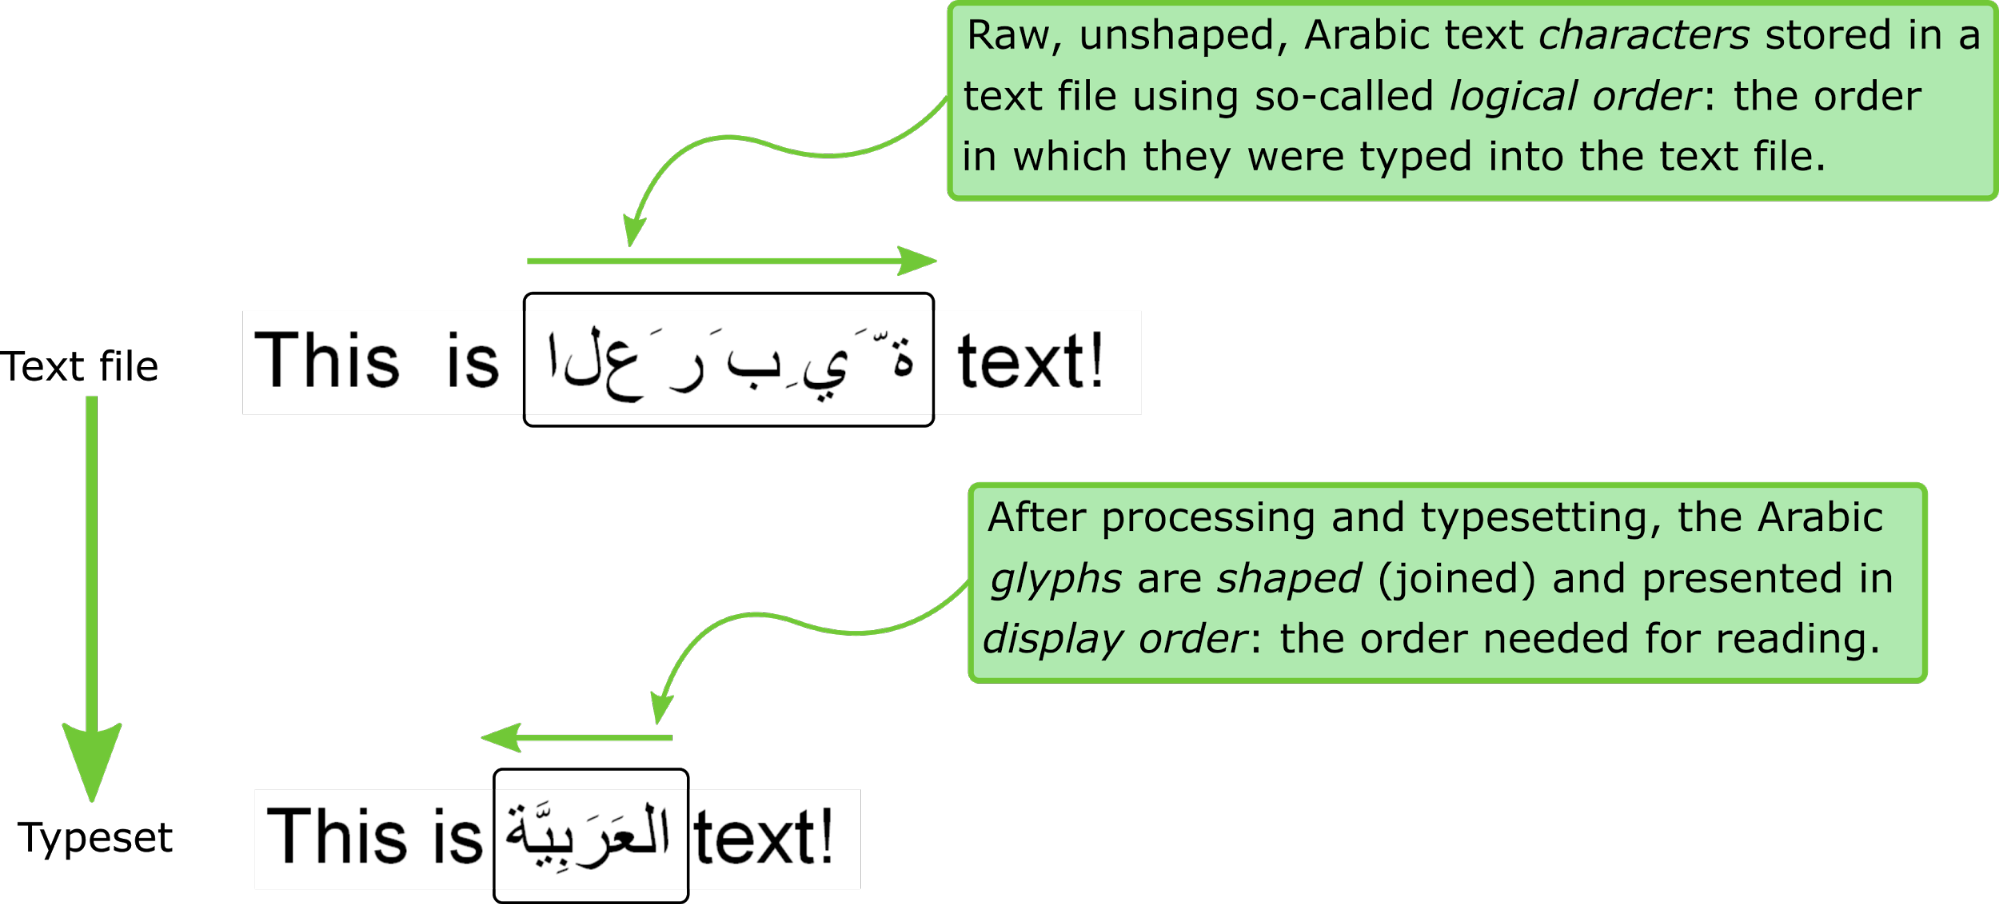 Image showing the transformation undergone by Arabic text when it is typeset